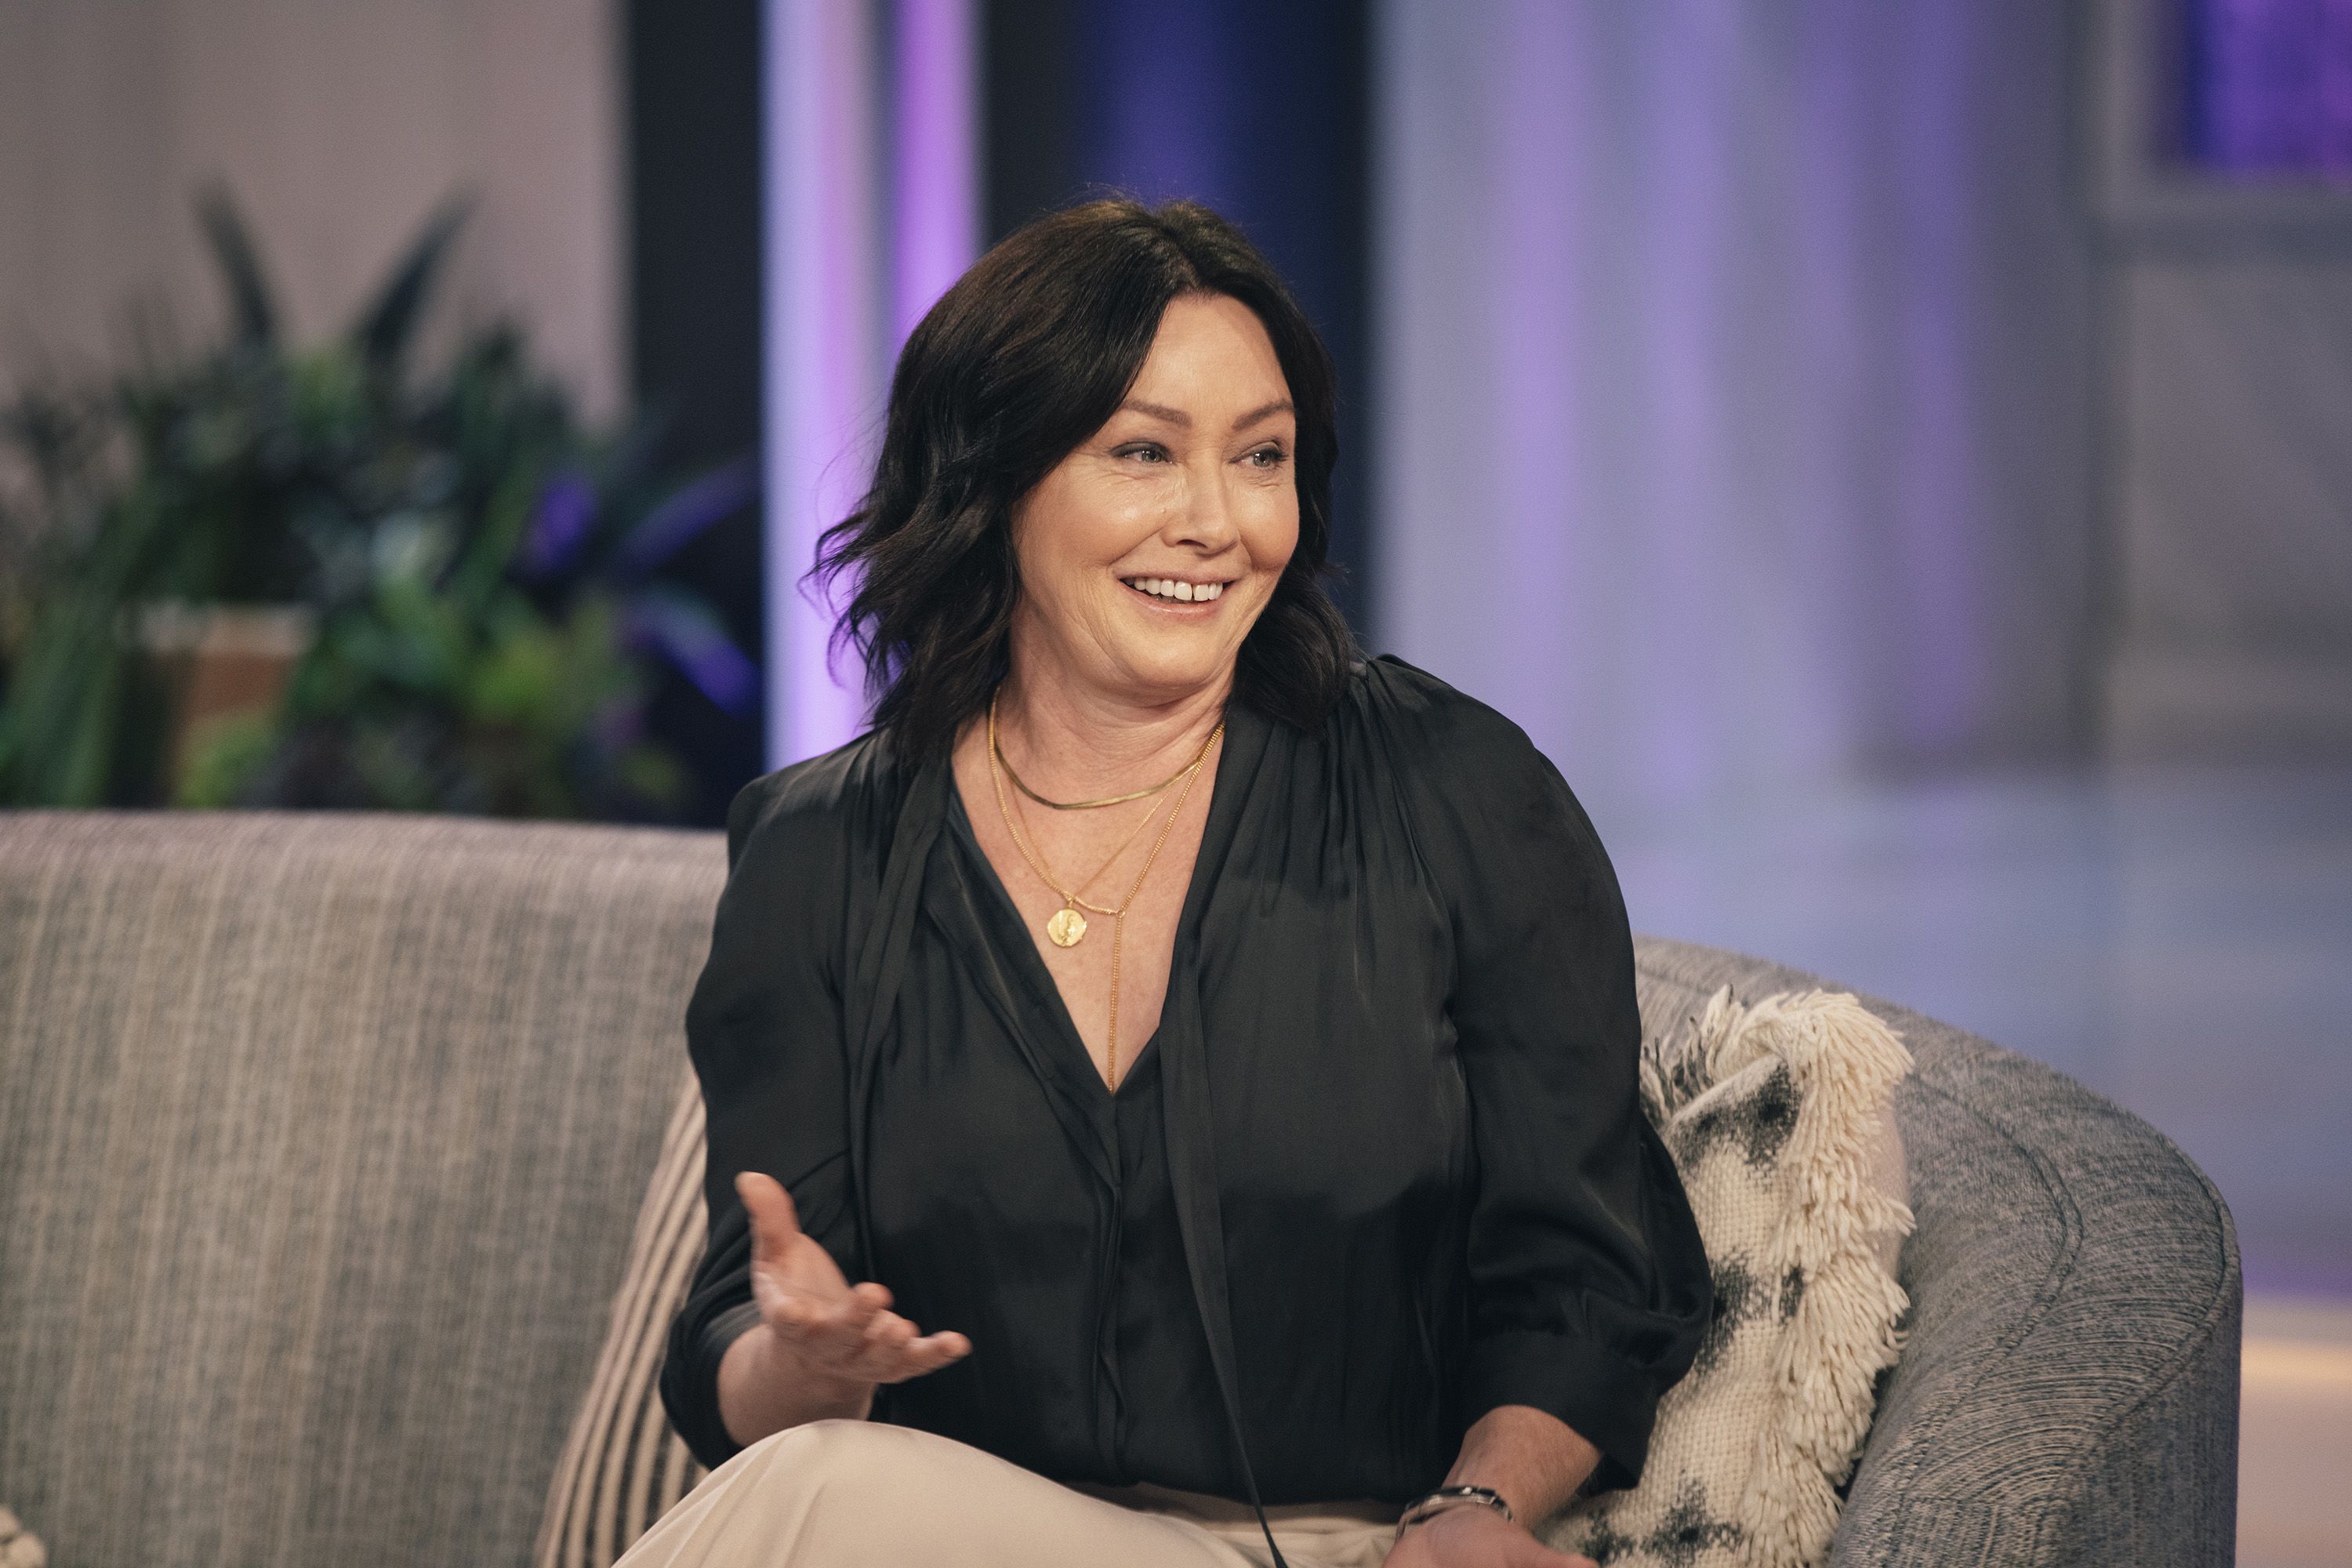 Shannen Doherty's cancer has advanced but she's got more living to do: 'I'm not done' | CNN